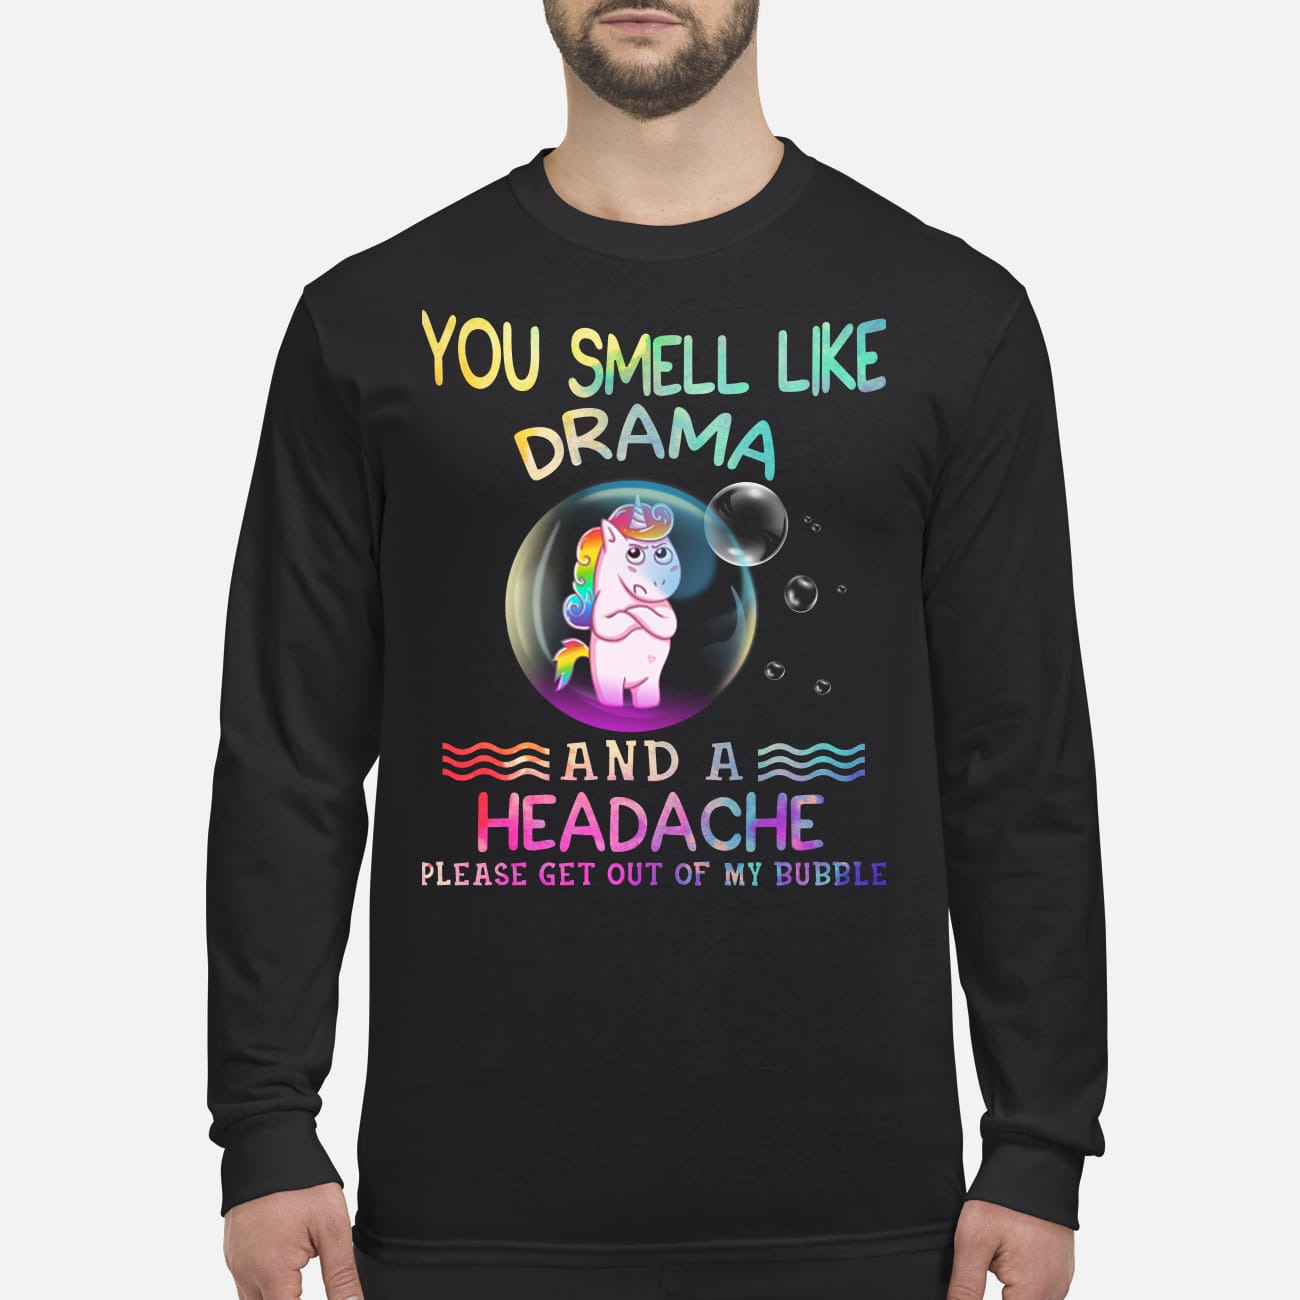 Unicorn you smell like drama and a headache get out of my bubble men's long sleeved shirt